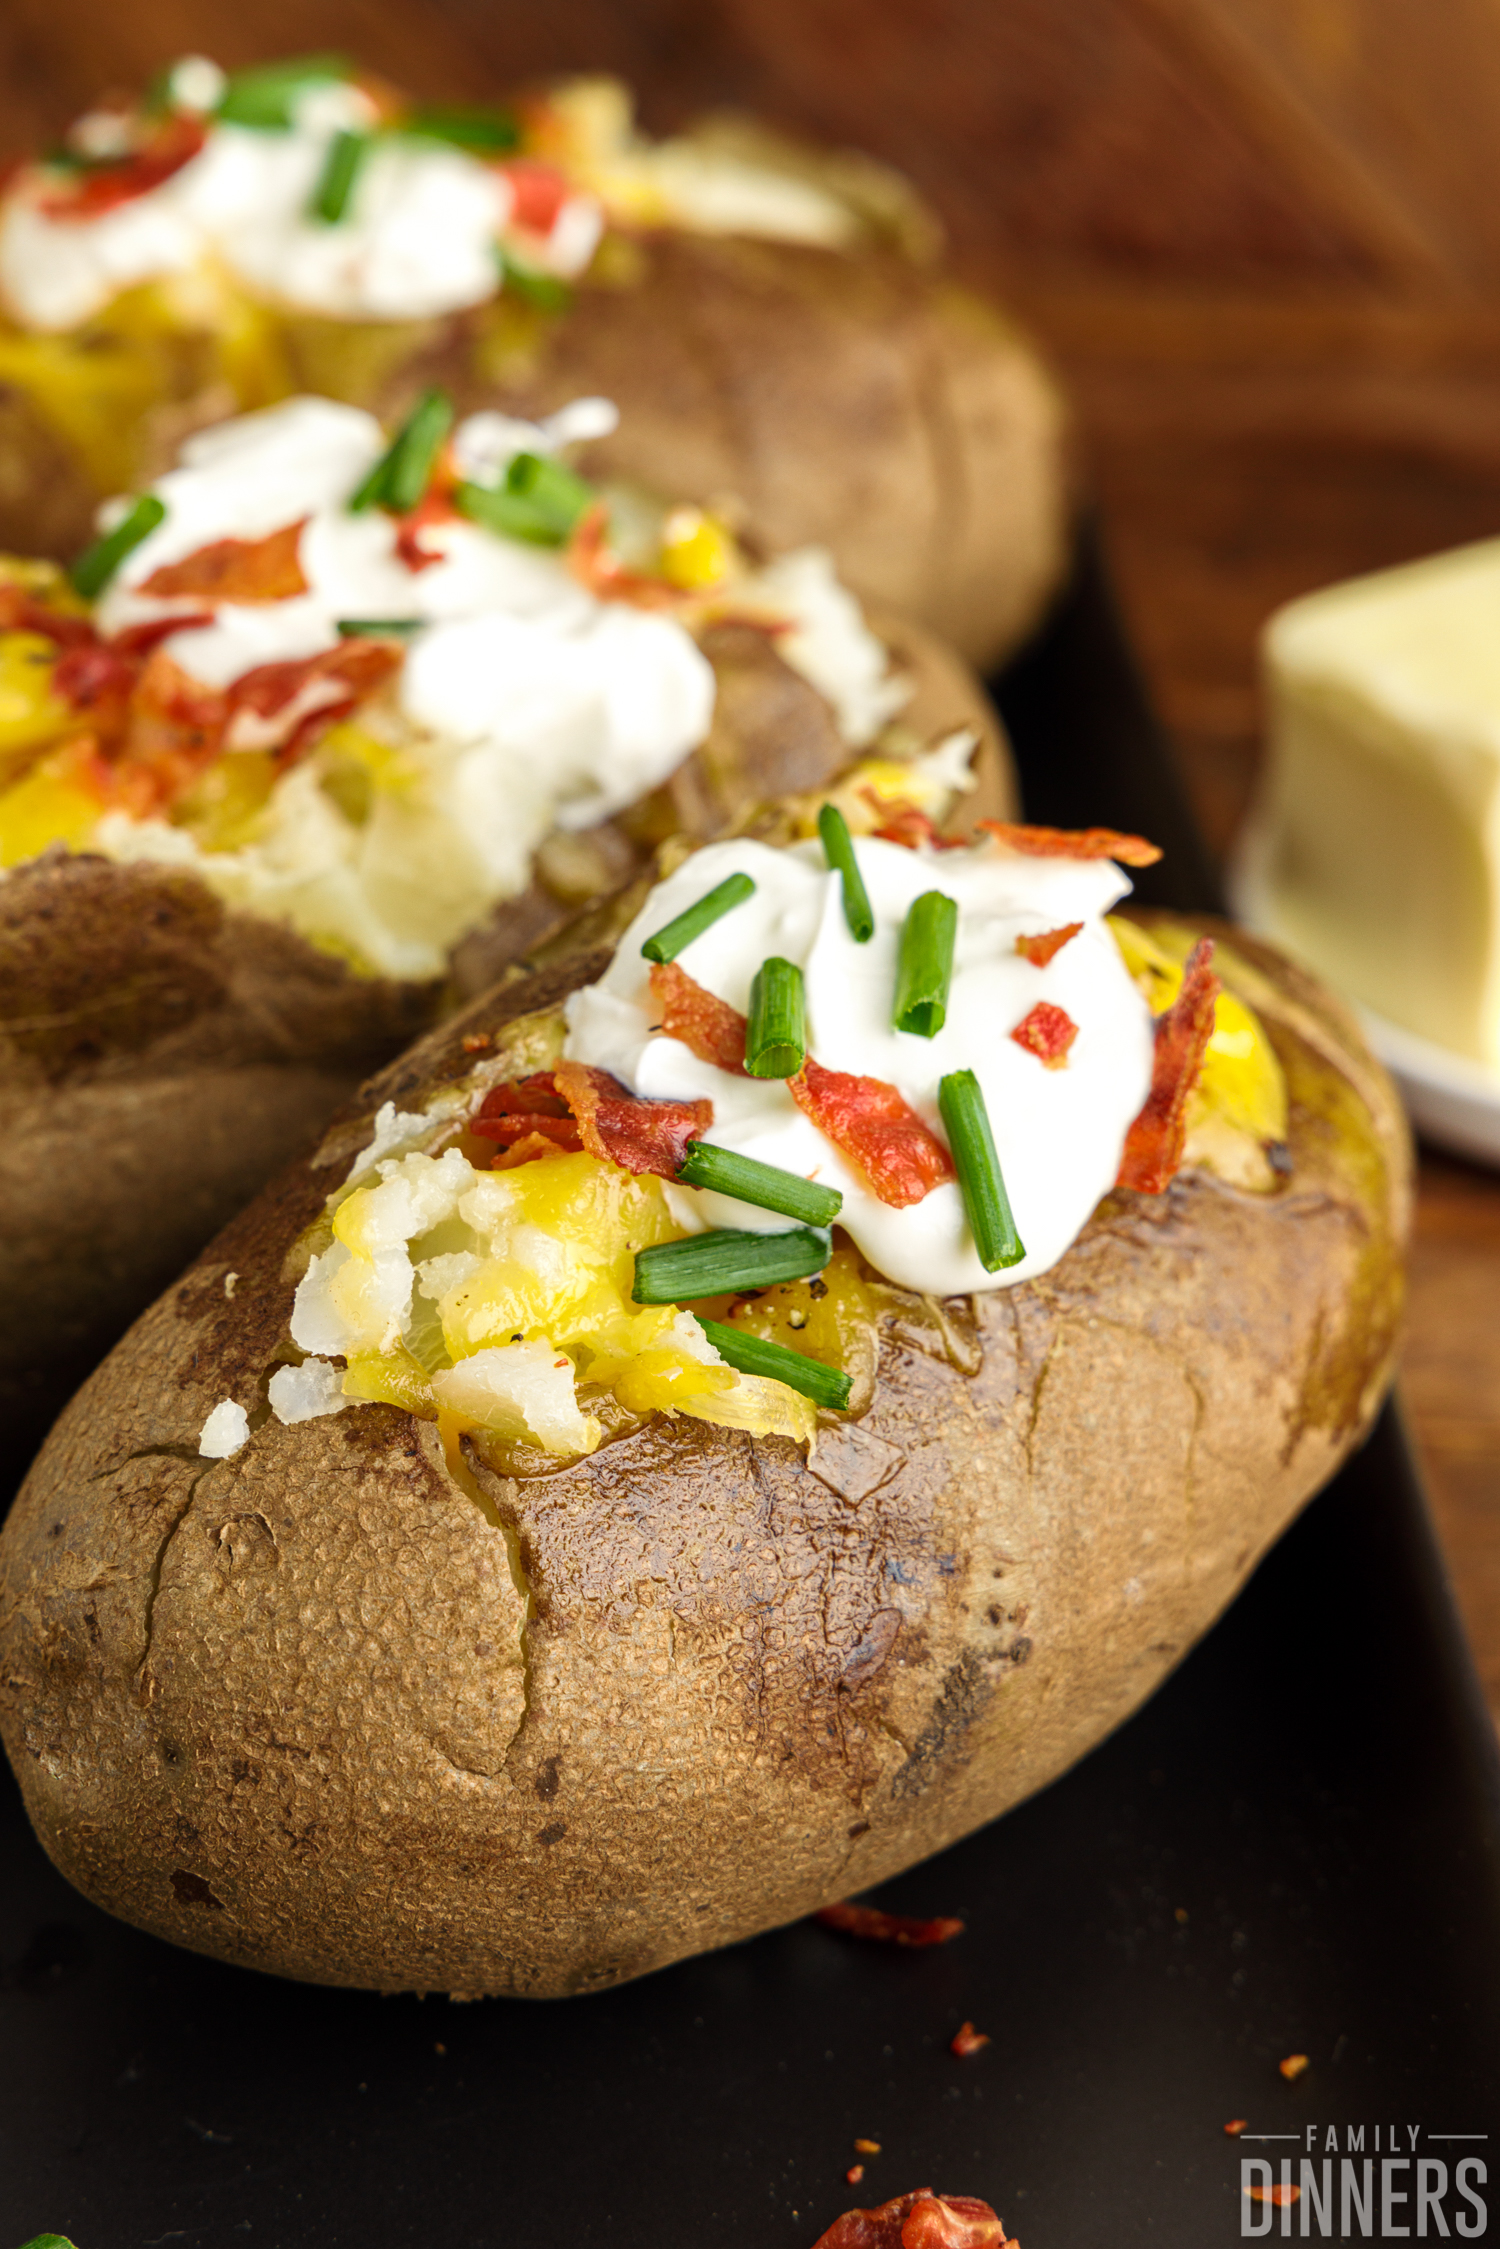 fully cooked baked potatoes loaded with cheddar cheese, sour cream, bacon bits and chives.